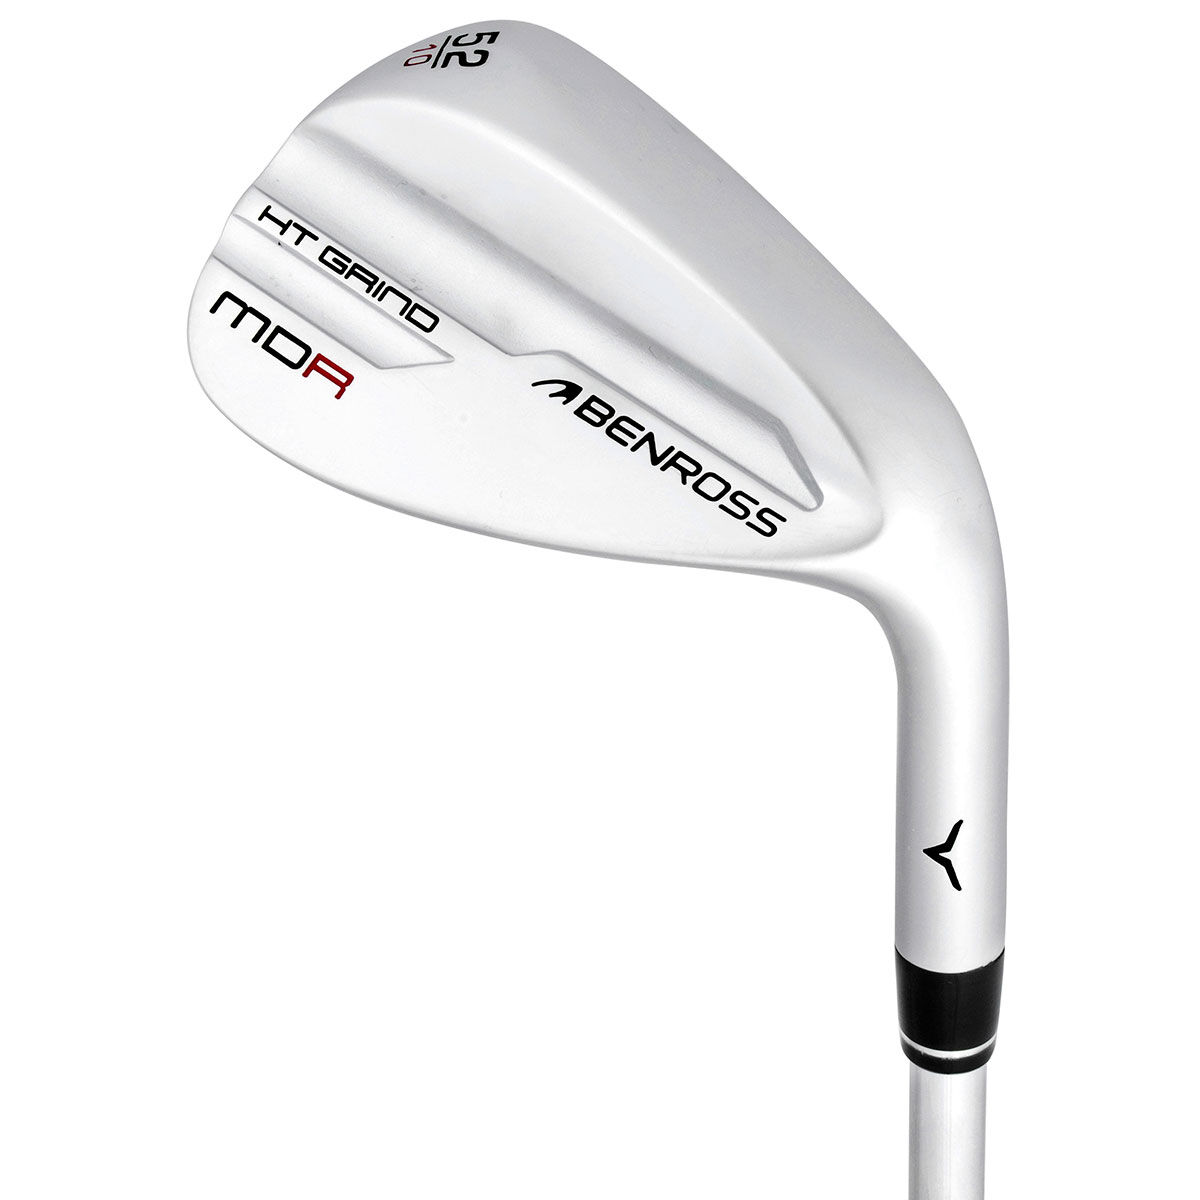 Benross Tribe MDR Wedge from american golf